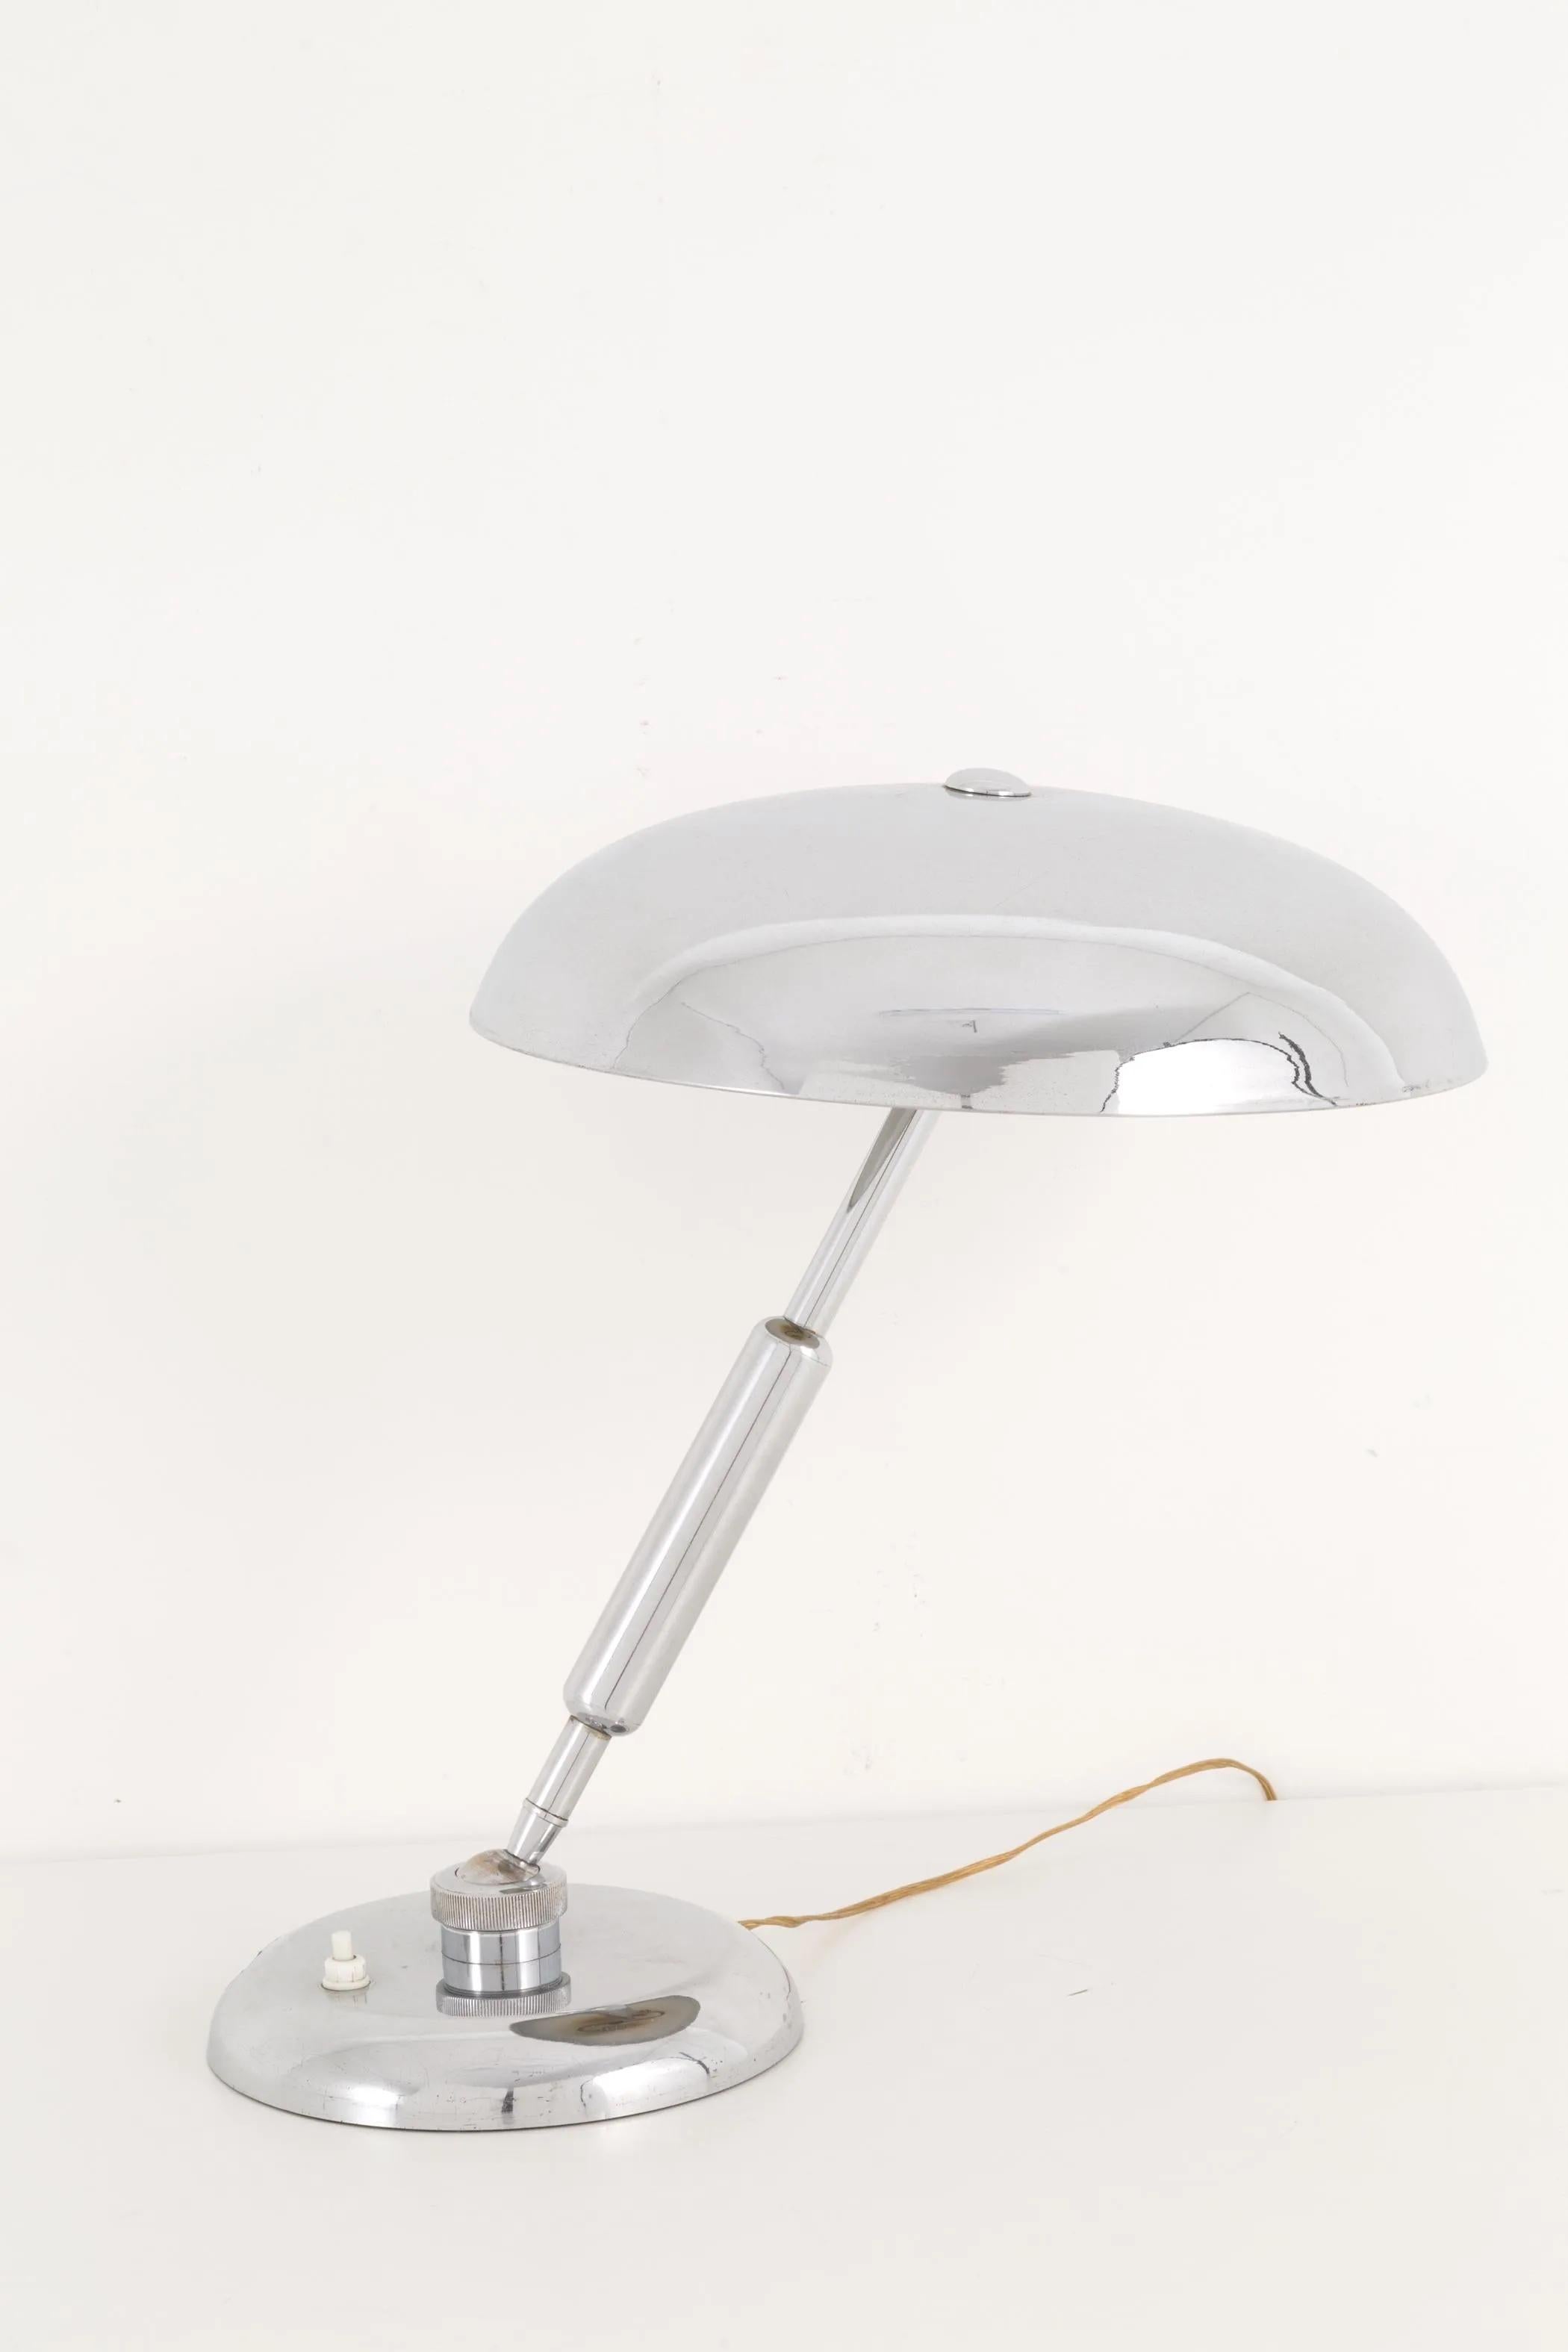 Gorgeous high quality table or desk lamp in polished nickel plated brass from Italy, 1940s-1950s with a weighted round base and an enormous ball joint from which the sturdy stem can pivot ~140 x 360 degrees. The round domed mushroom head is also